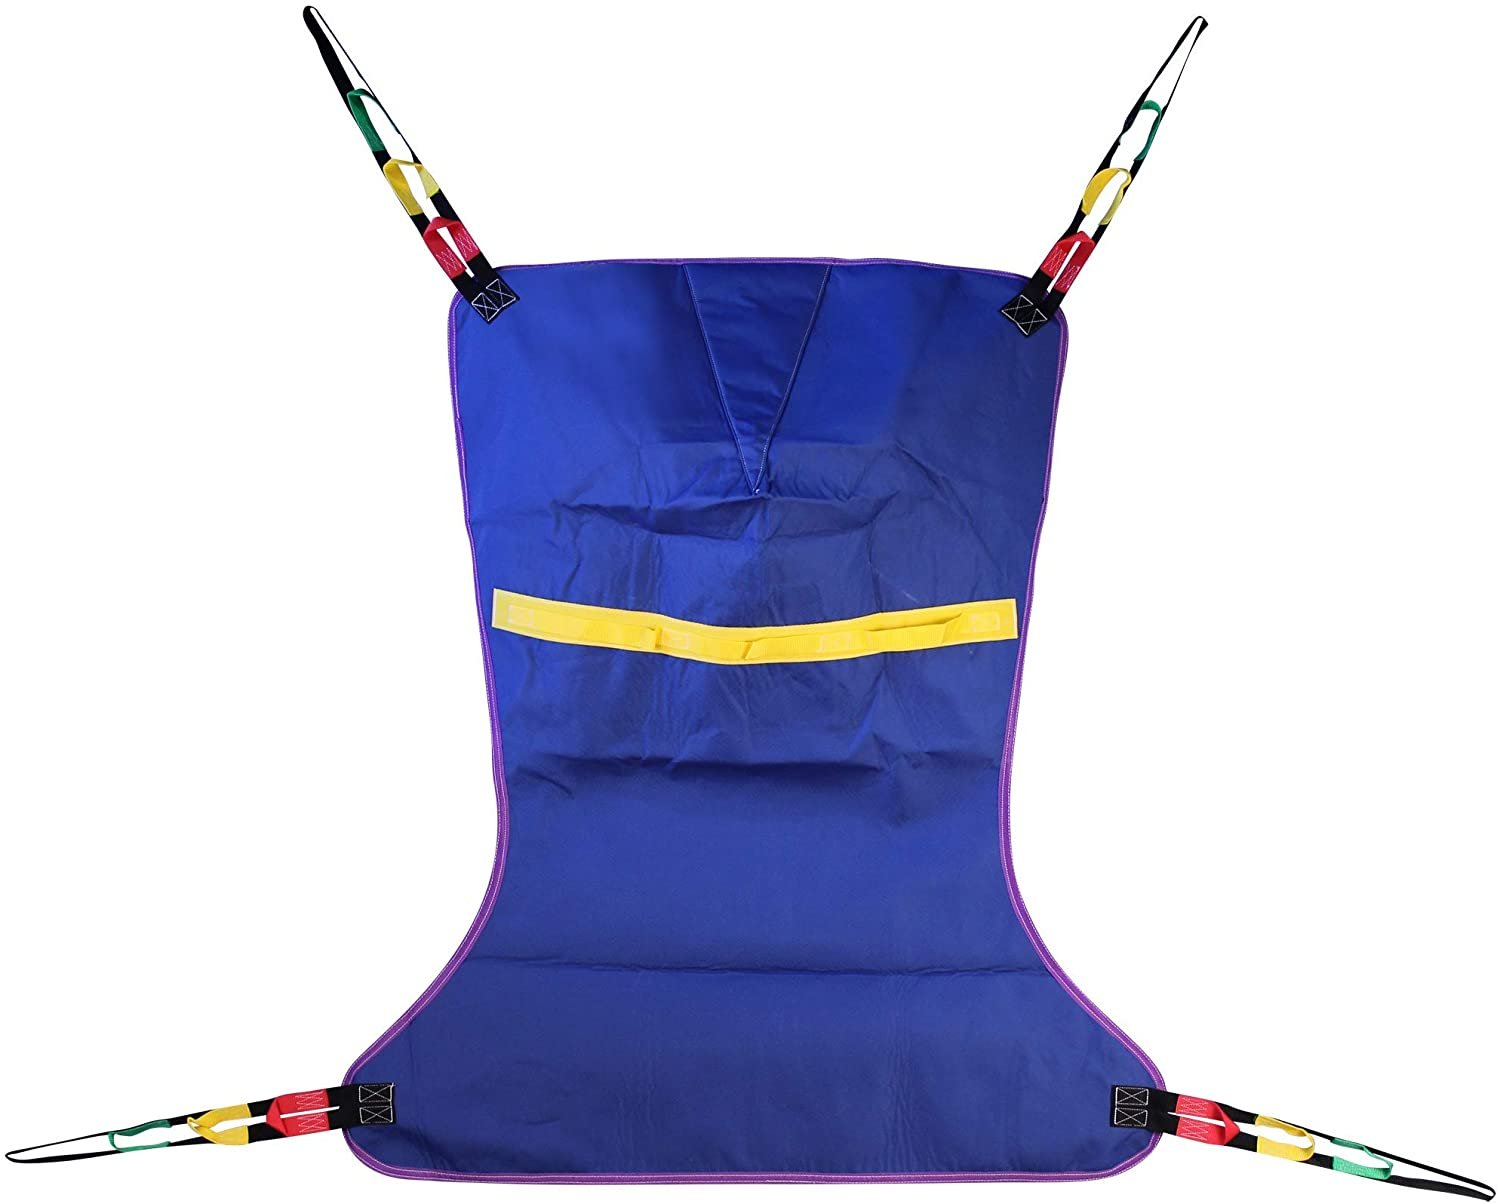 ProHeal Universal Full Body Lift Sling, Large, 55"L x 43" - Solid Fabric Polyester Slings for Patient Lifts - Compatible with Hoyer, Invacare, McKesson, Drive, Lumex, Medline, Joerns and More